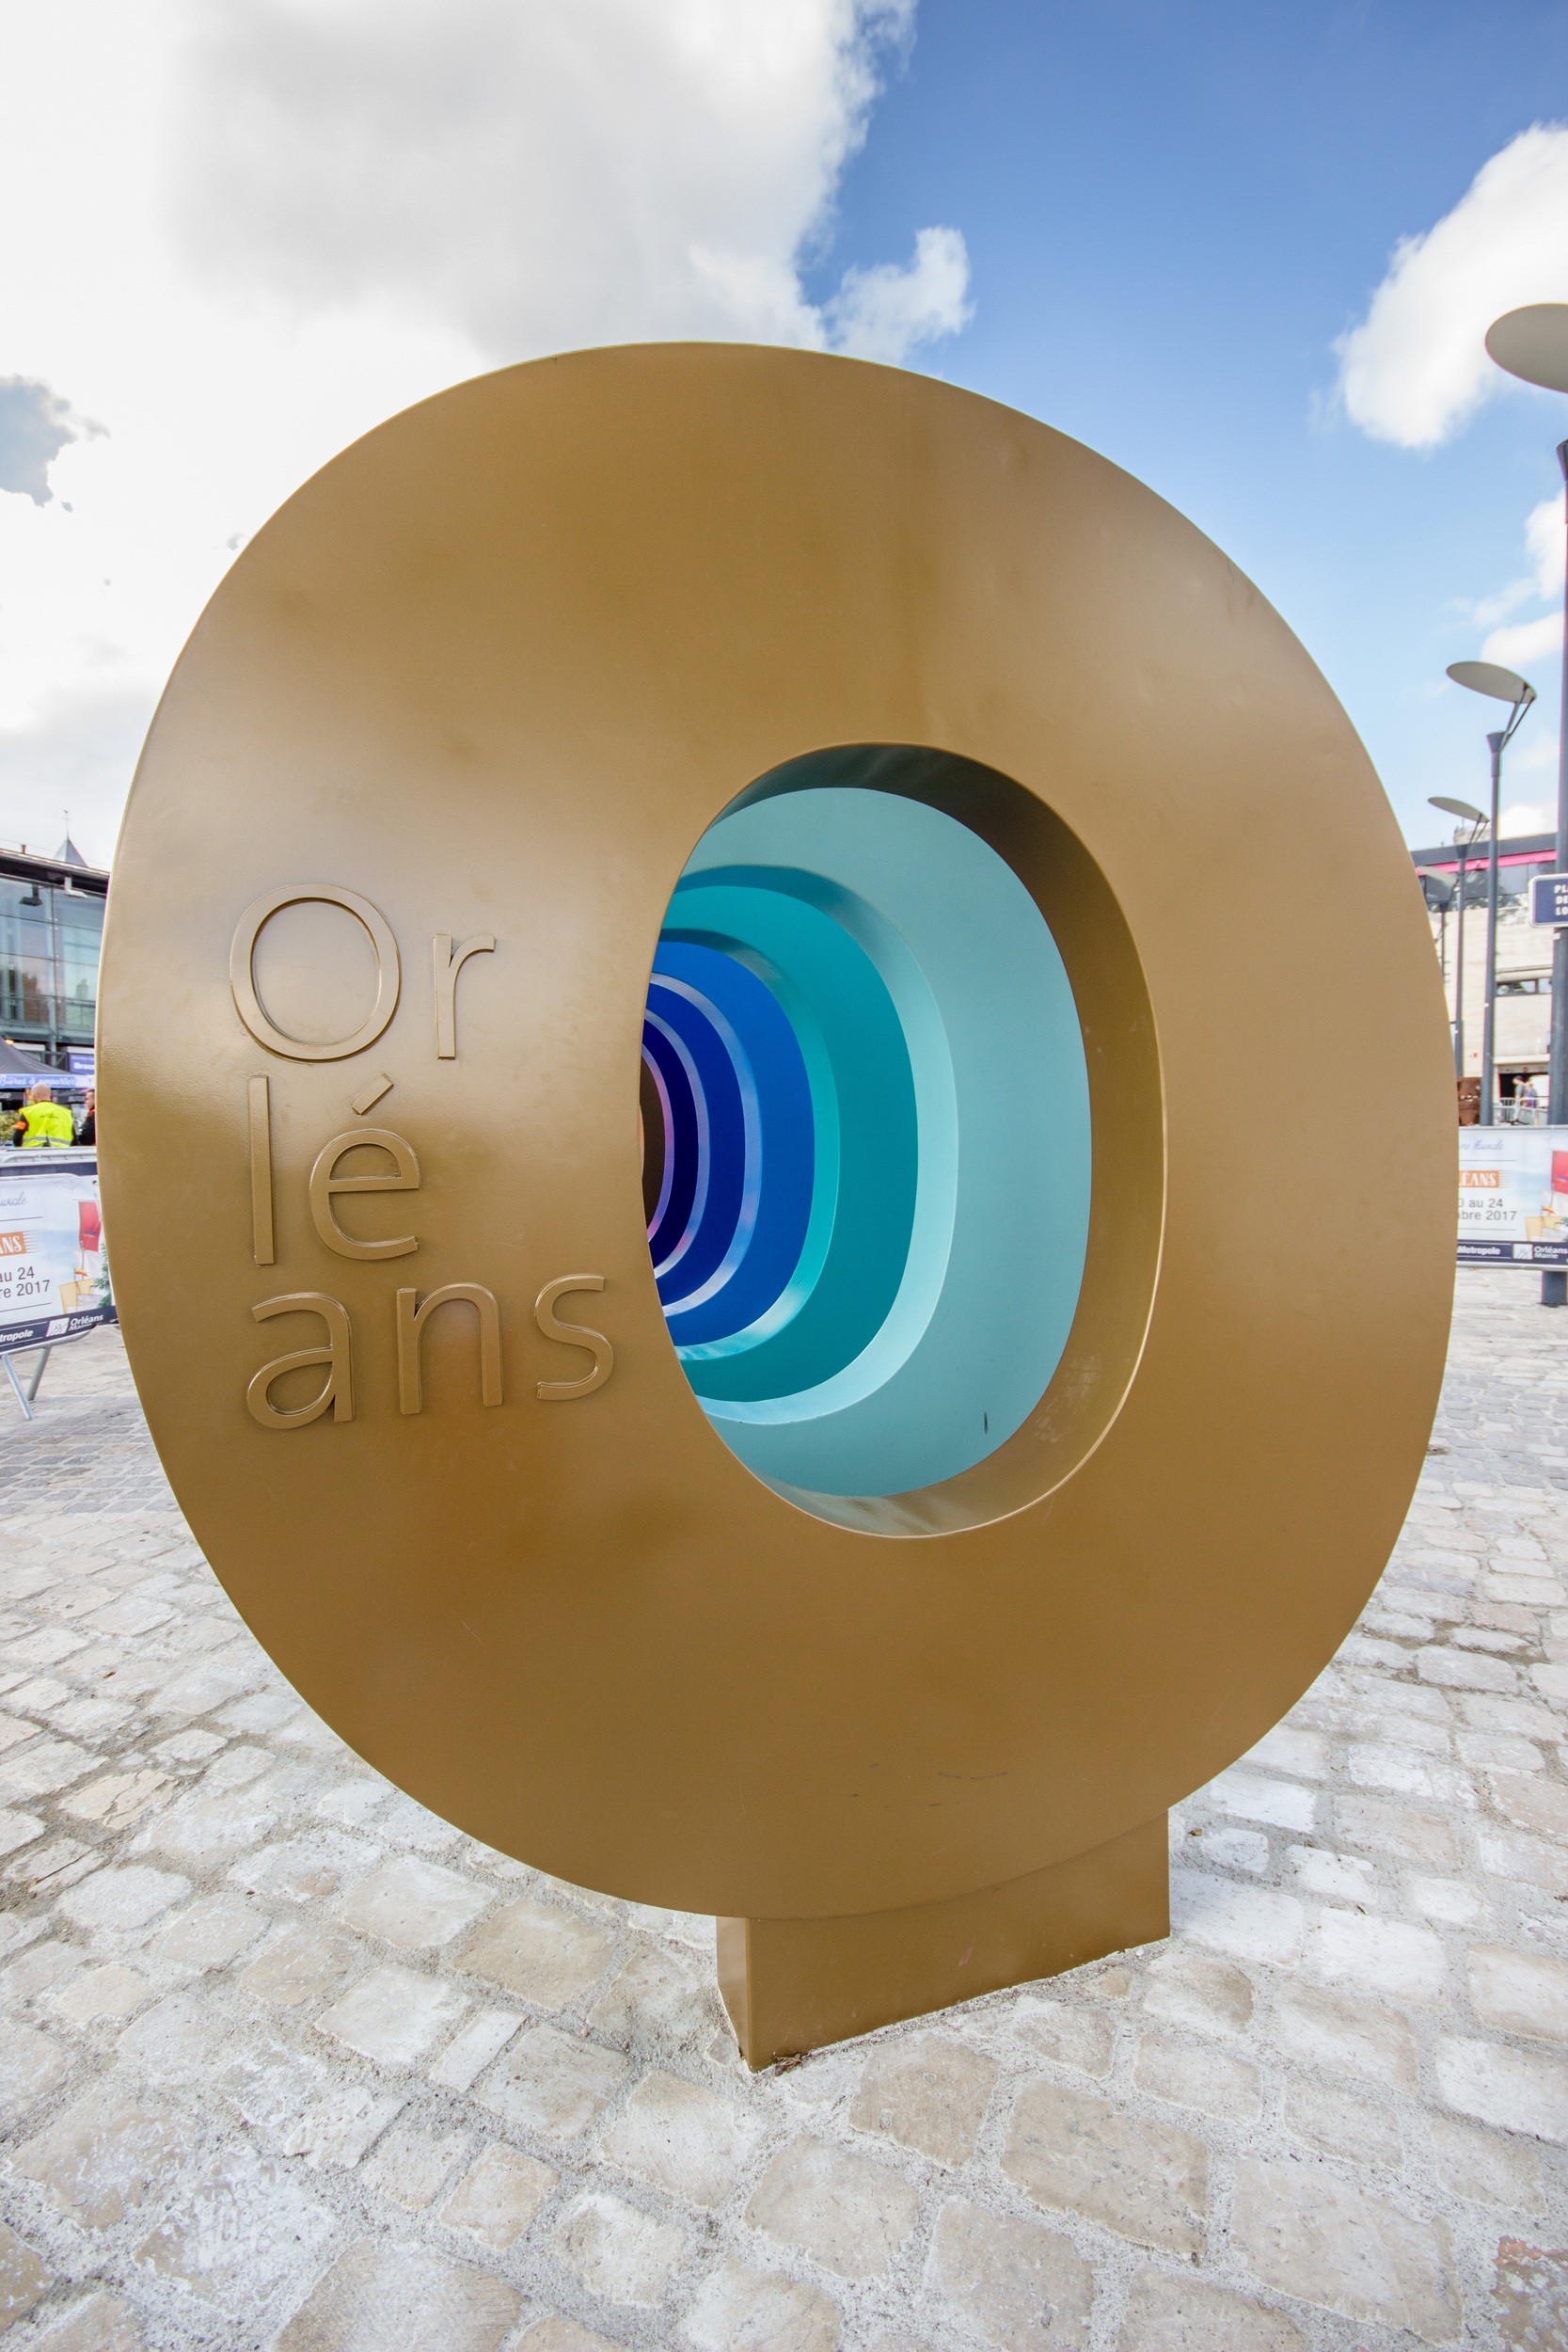 Things to do in Orleans, France